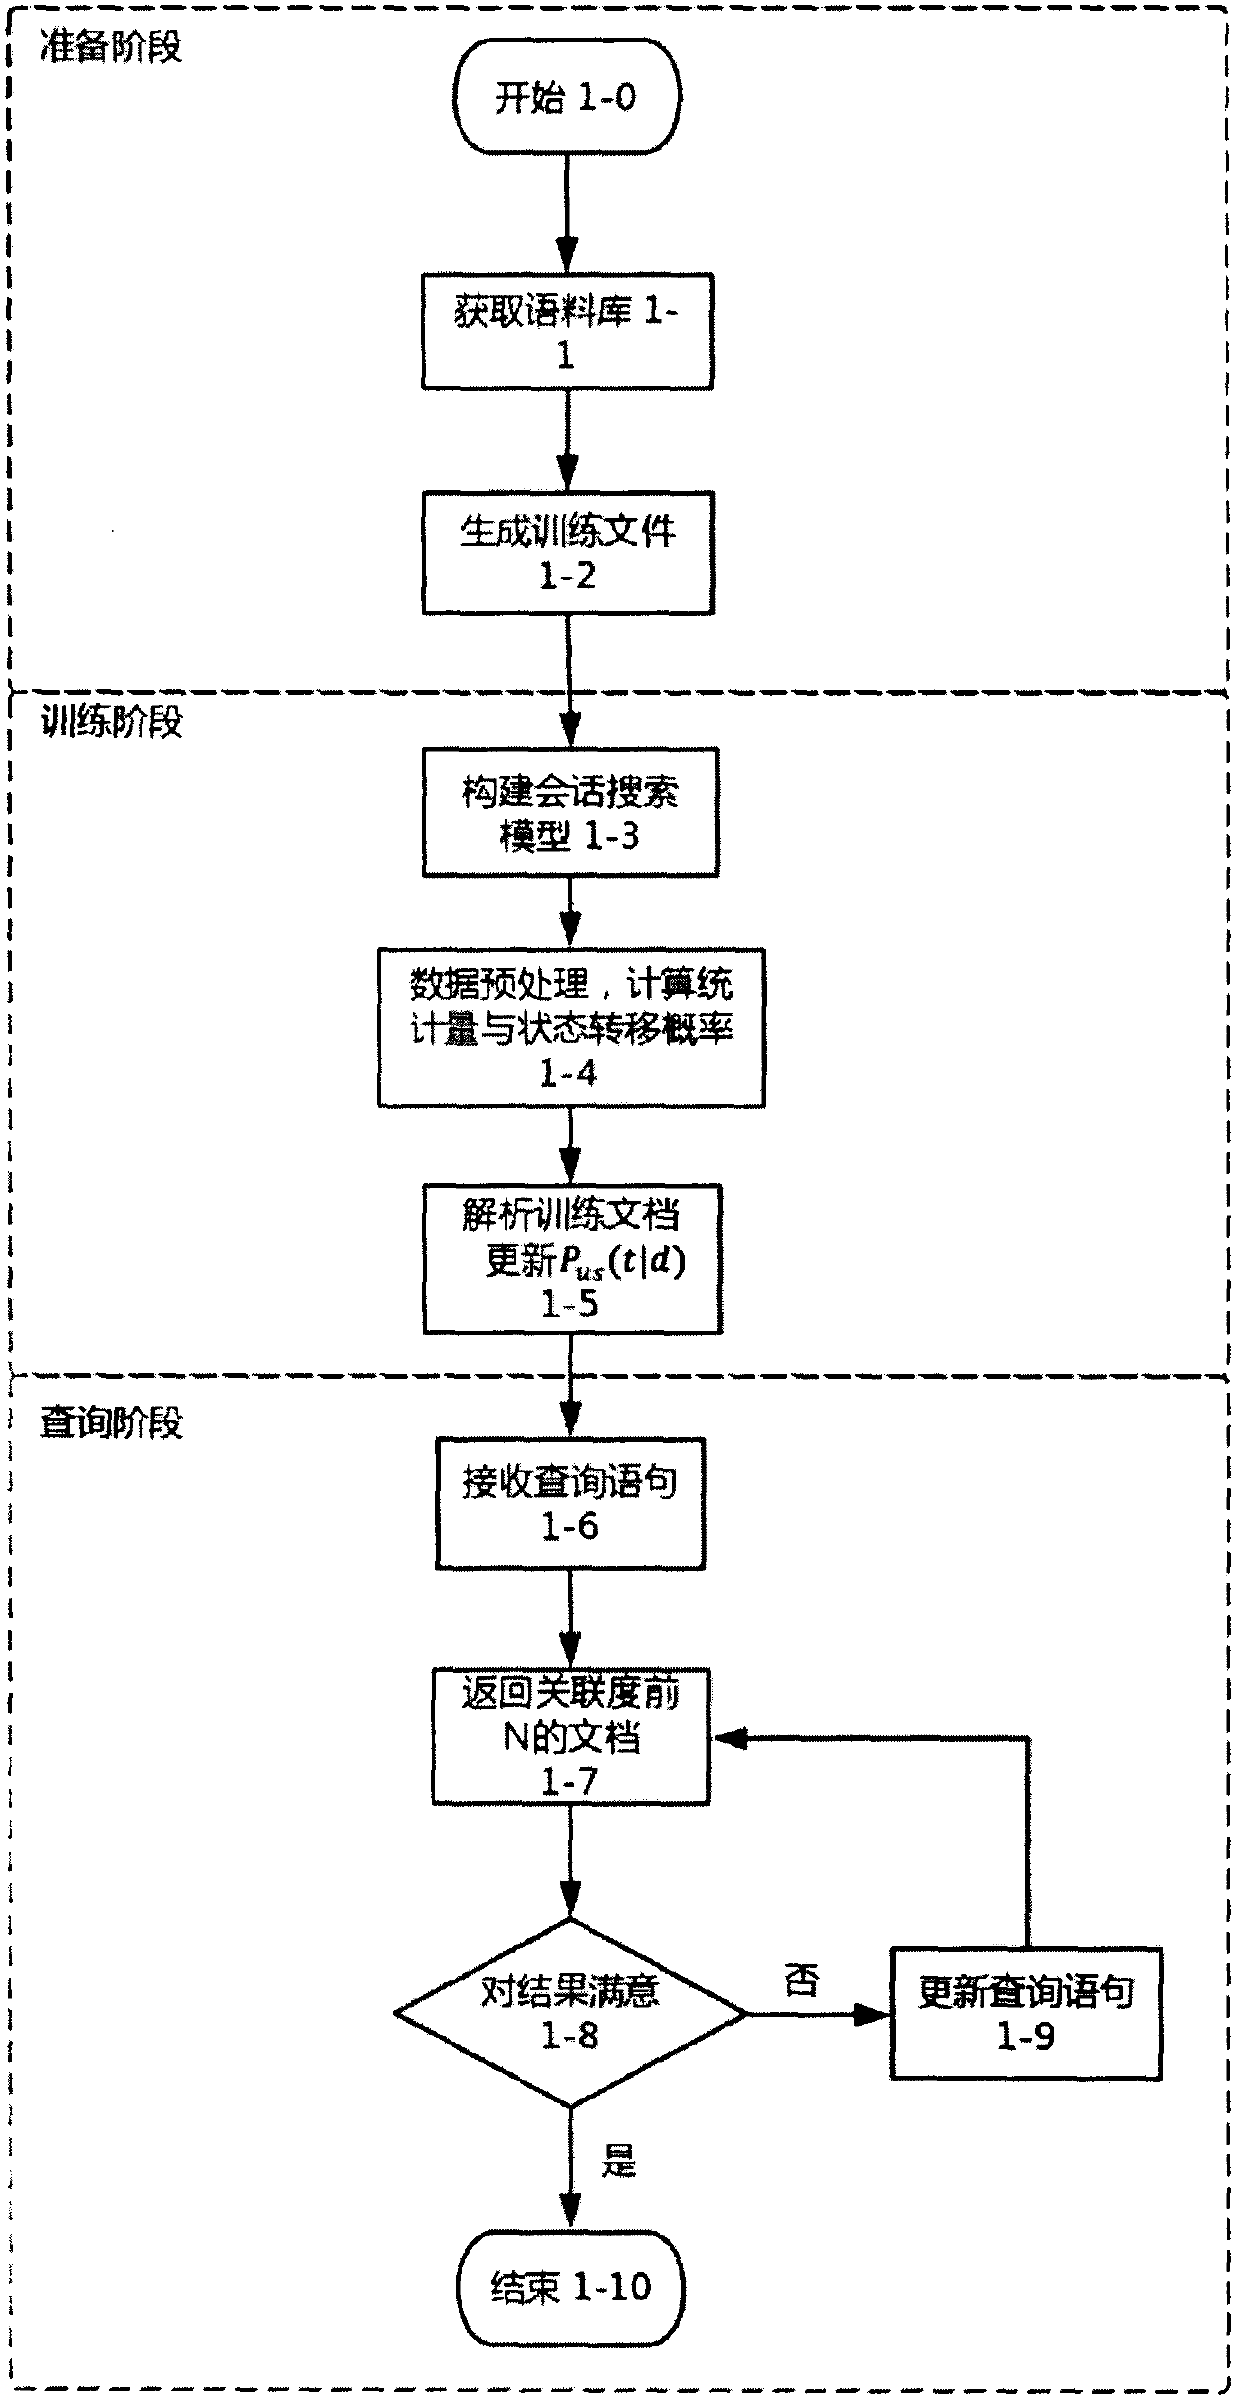 Method for searching session on basis of partially observable Markov decision process models